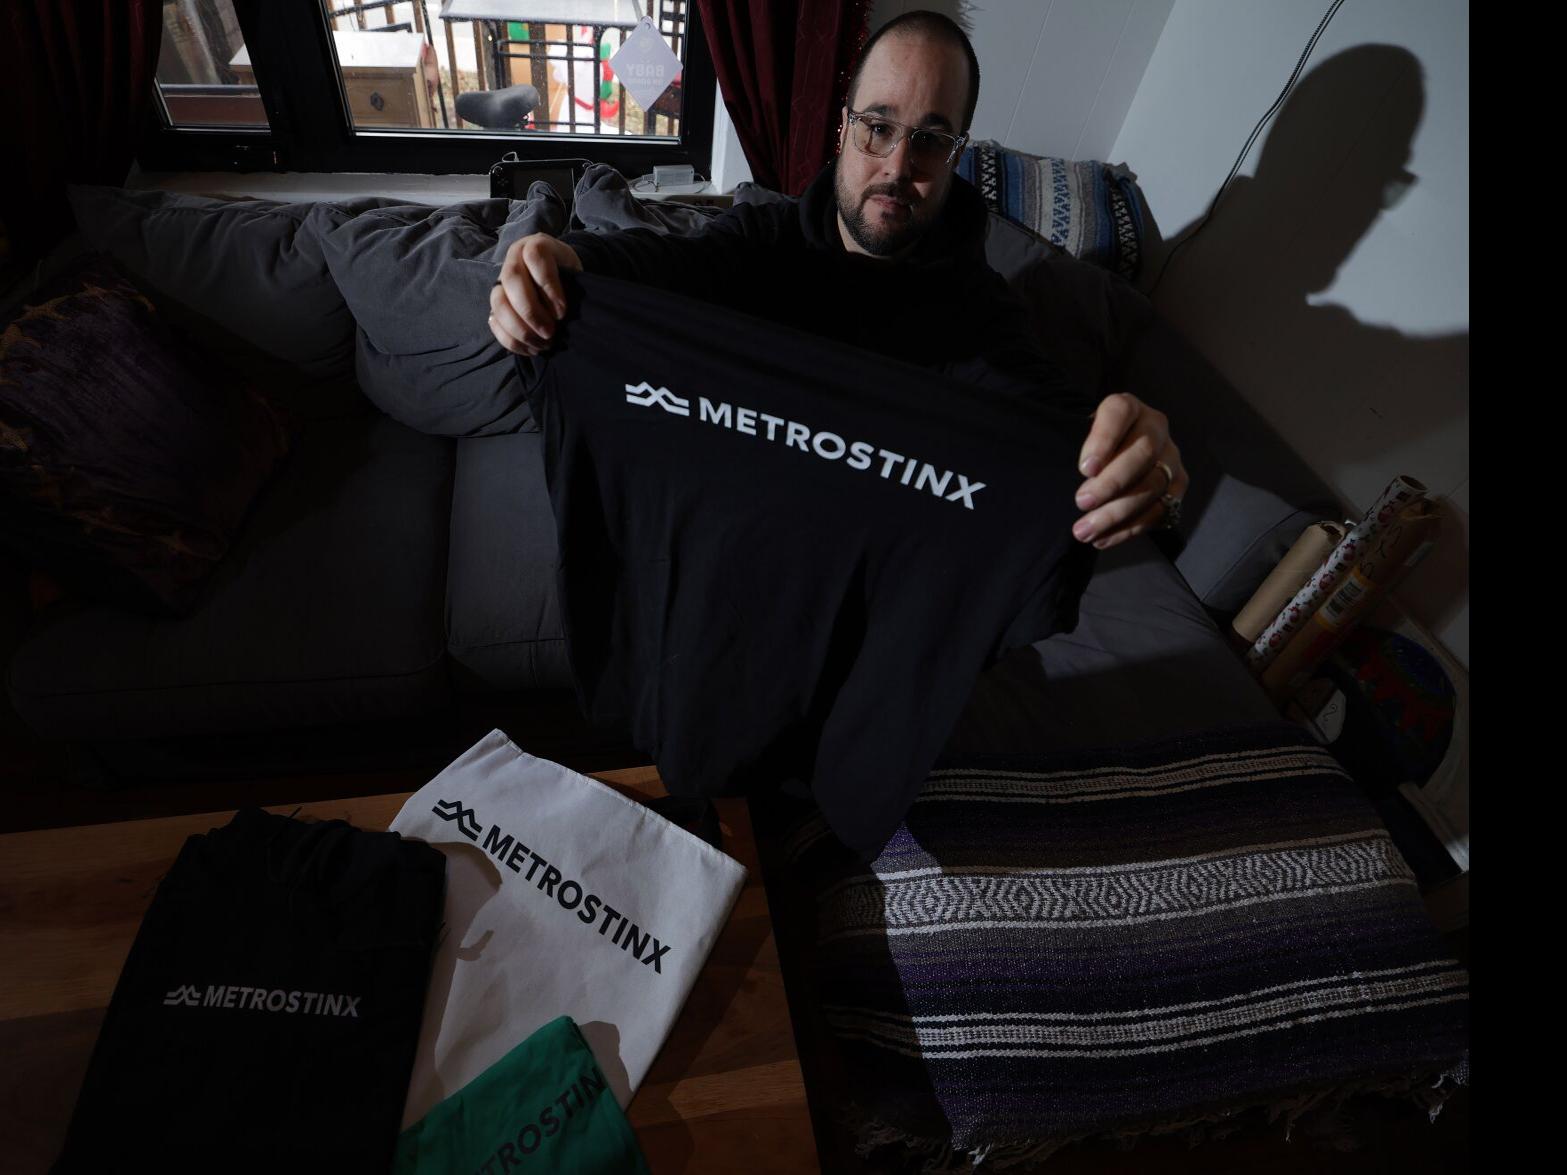 Metrolinx should heed the serious message behind the cheeky 'Metrostinx' T- shirts